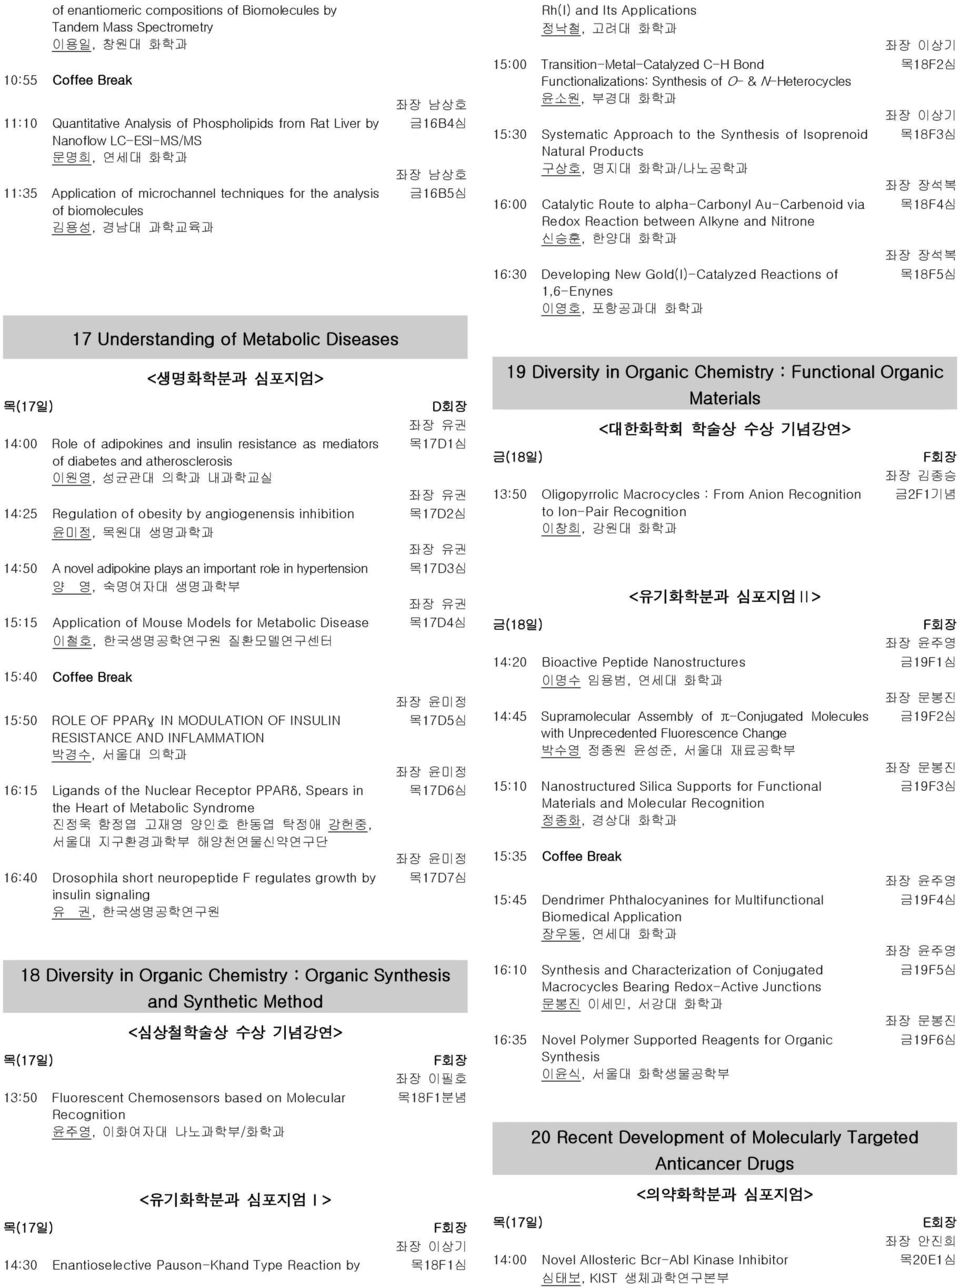 14:00 Role of adipokines and insulin resistance as mediators 목17D1심 of diabetes and atherosclerosis 이원영, 성균관대 의학과 내과학교실 좌장 유권 14:25 Regulation of obesity by angiogenensis inhibition 목17D2심 윤미정, 목원대